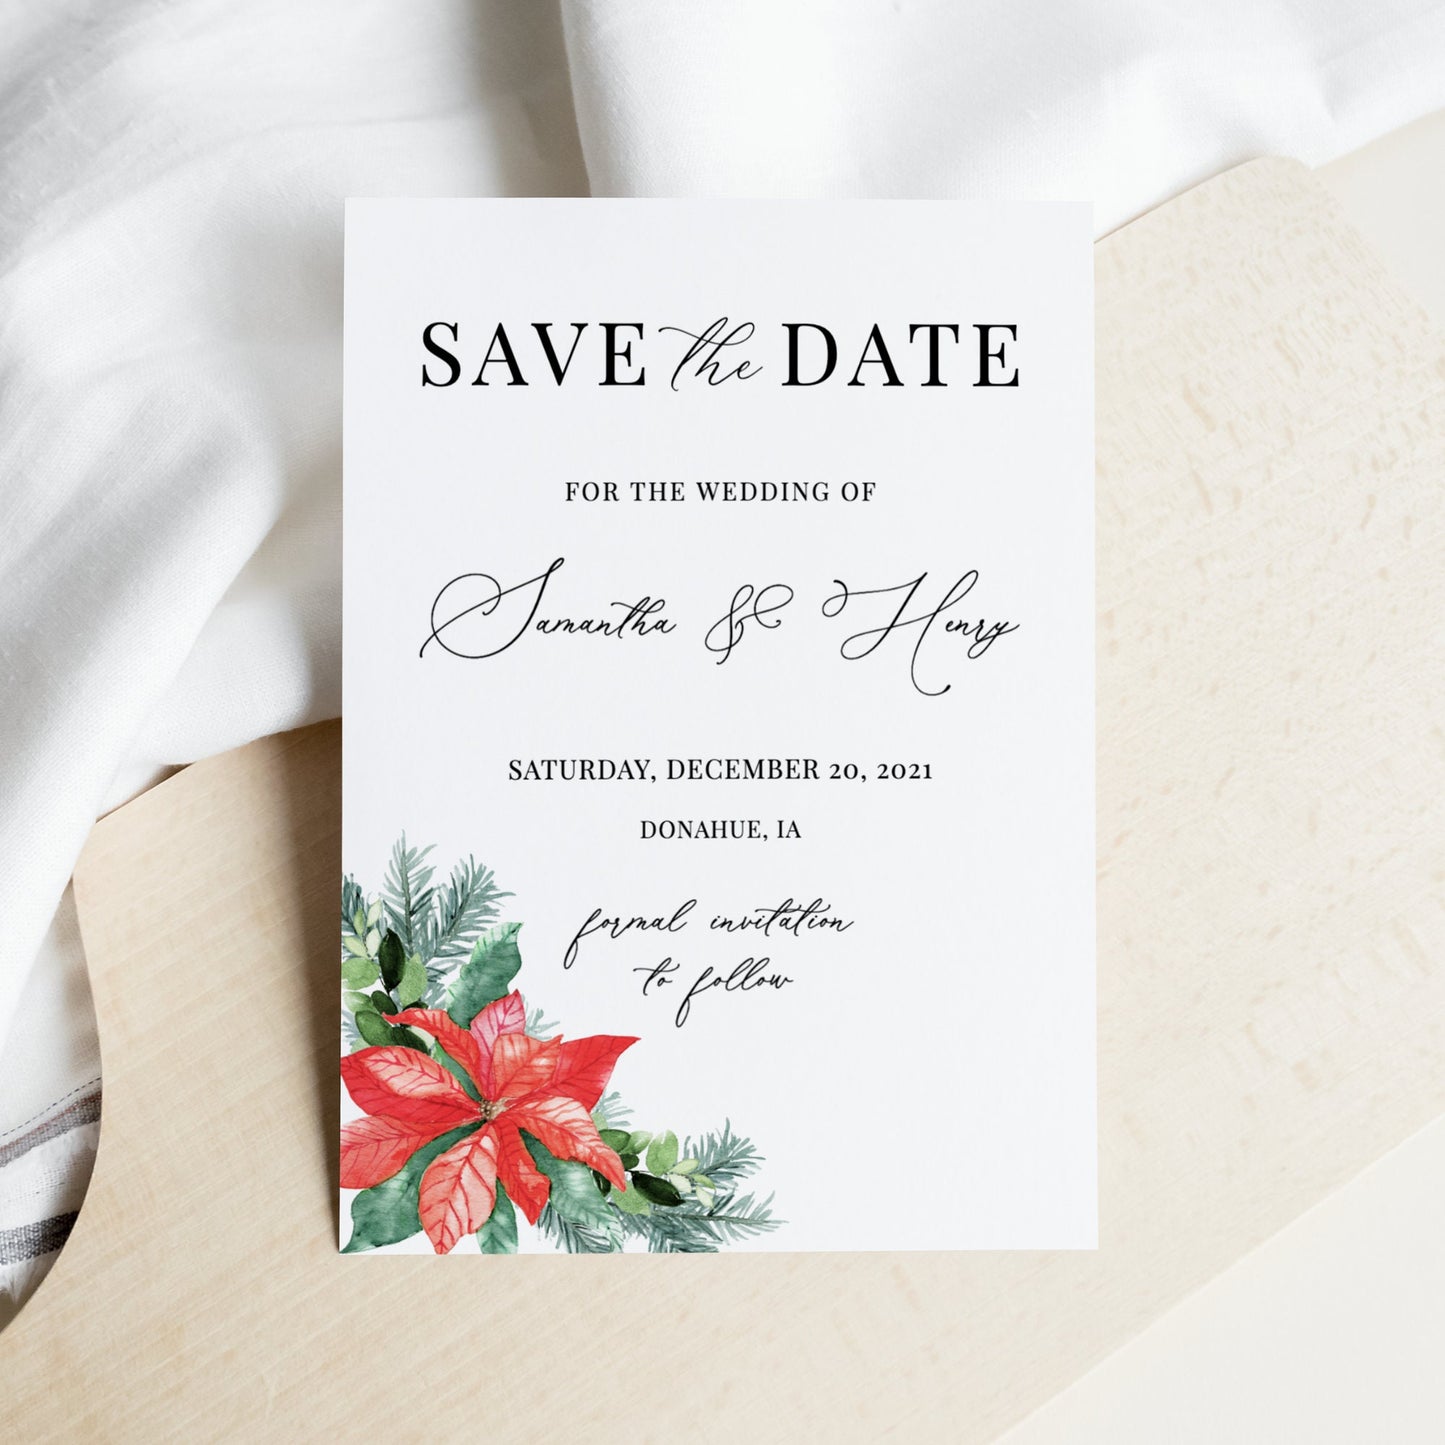 Editable Winter Save the Date Poinsettia Save the Date Cards Wedding Announcement Text Digital Template